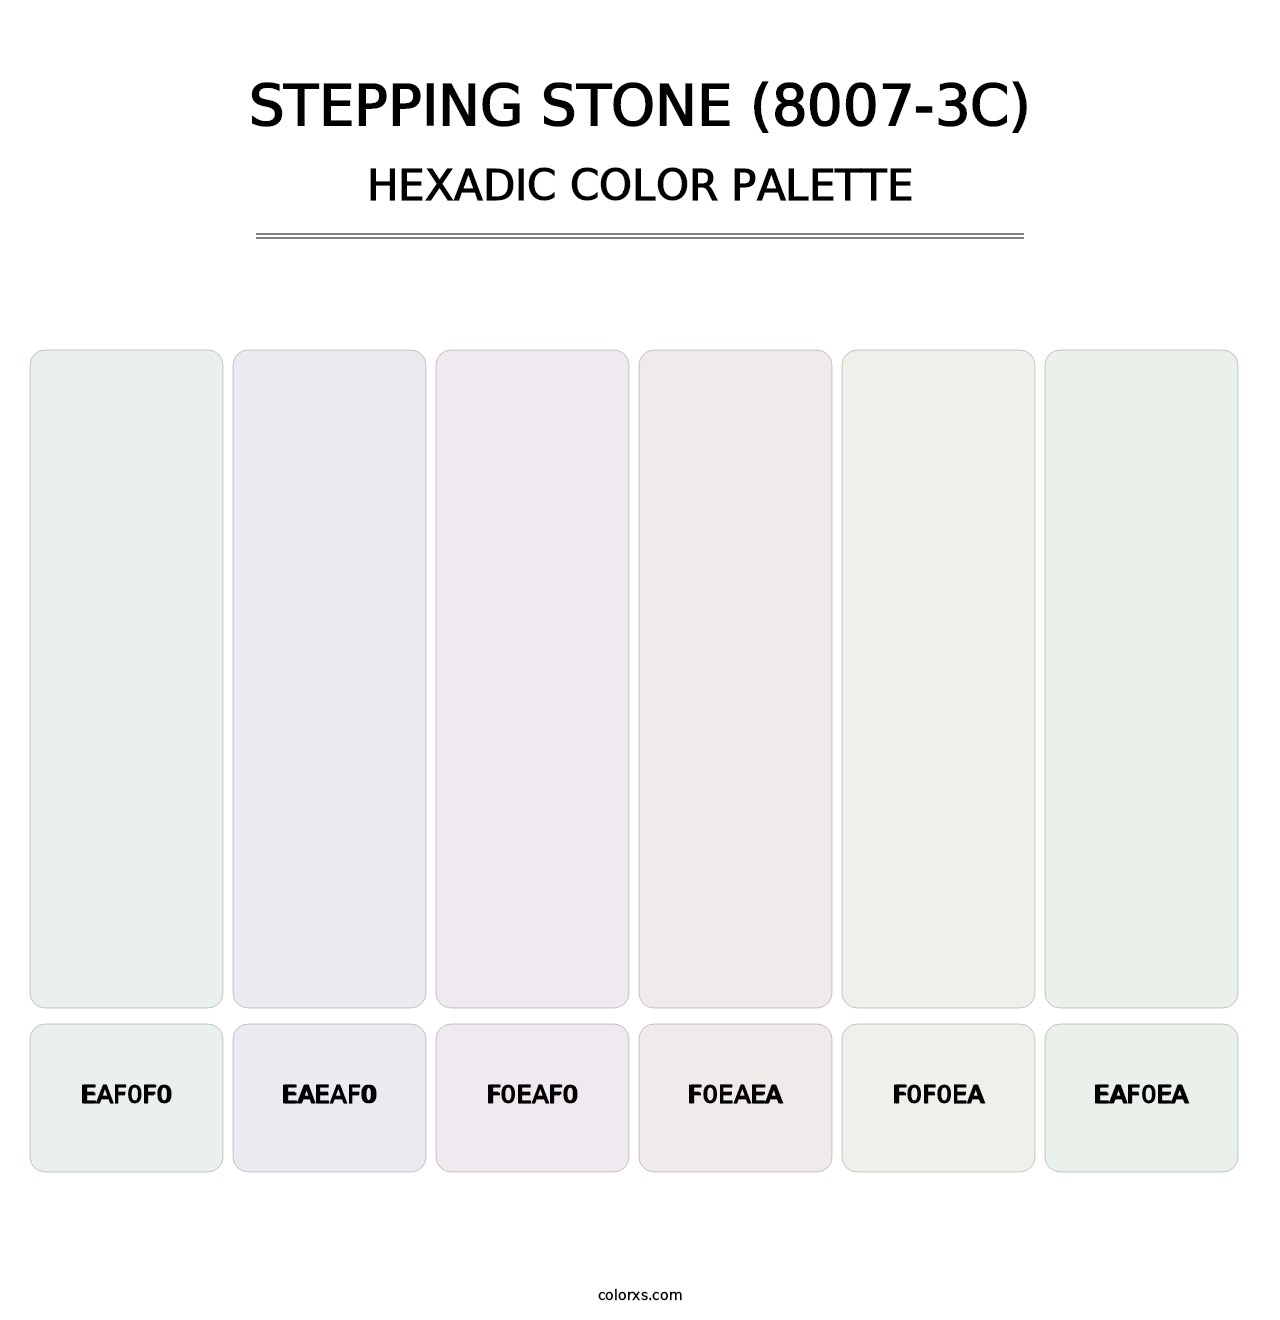 Stepping Stone (8007-3C) - Hexadic Color Palette